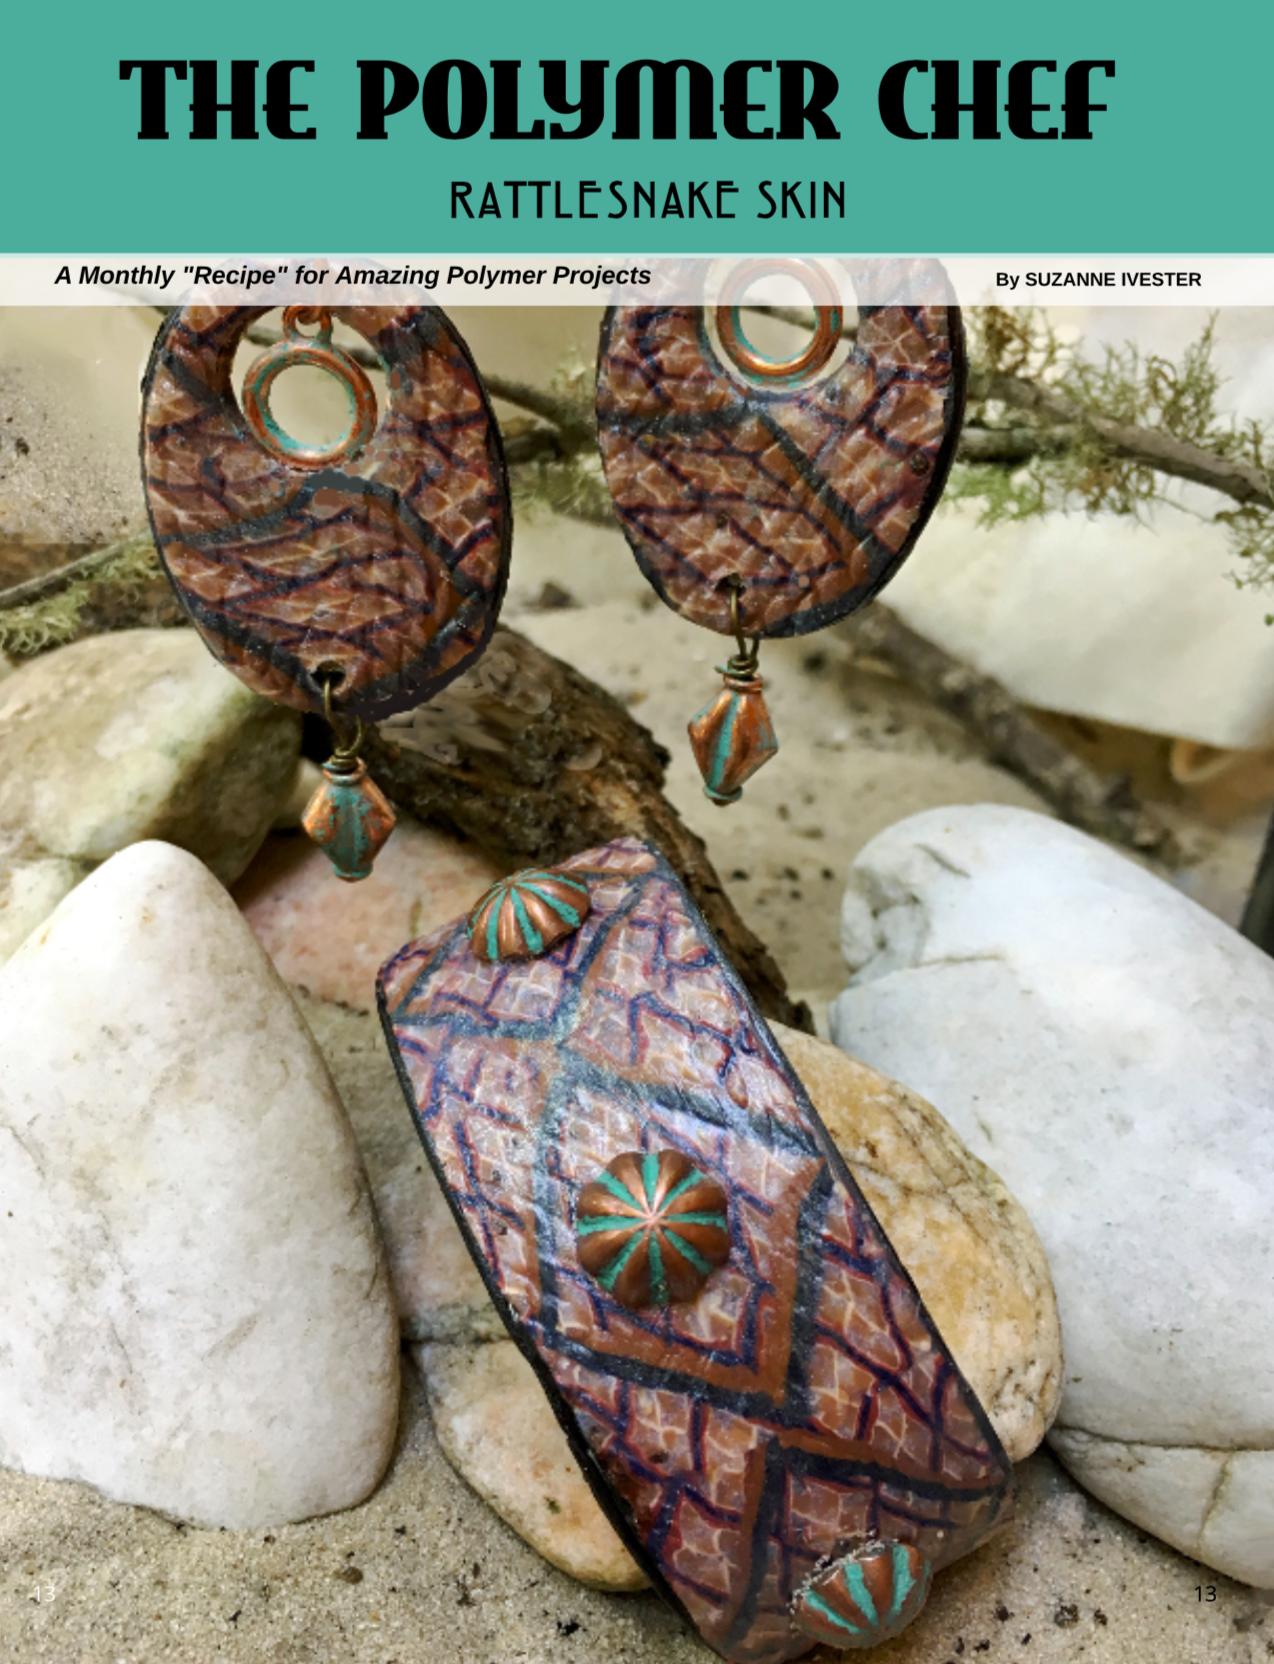 DIGITAL December 2019 download PDF Passion for Polymer clay project book magazine mixed media - Polymer Clay TV tutorial and supplies